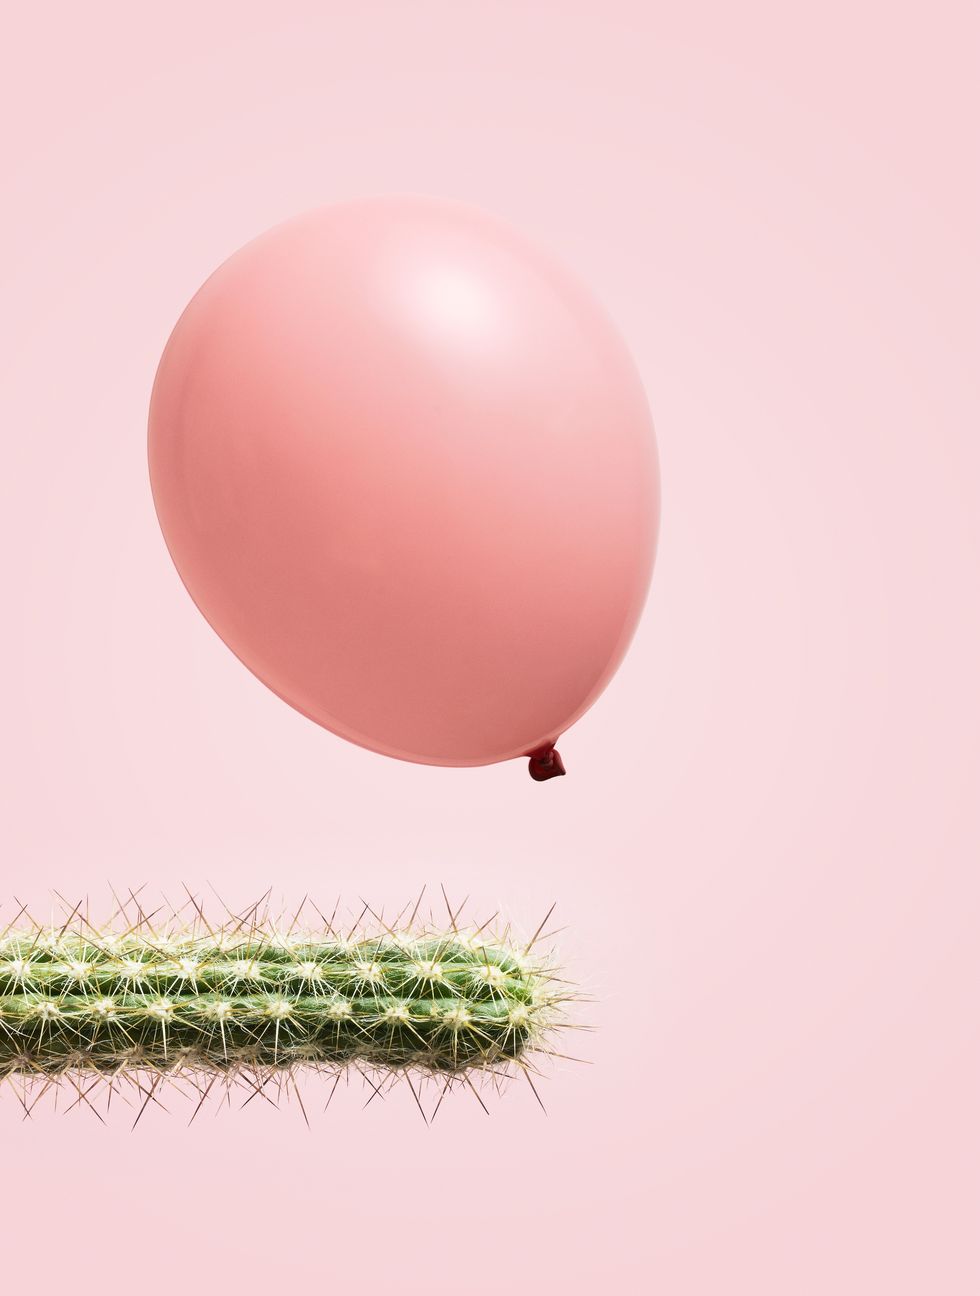 a spikey cactus plant horizontal with a pink balloon floating above on a pink background